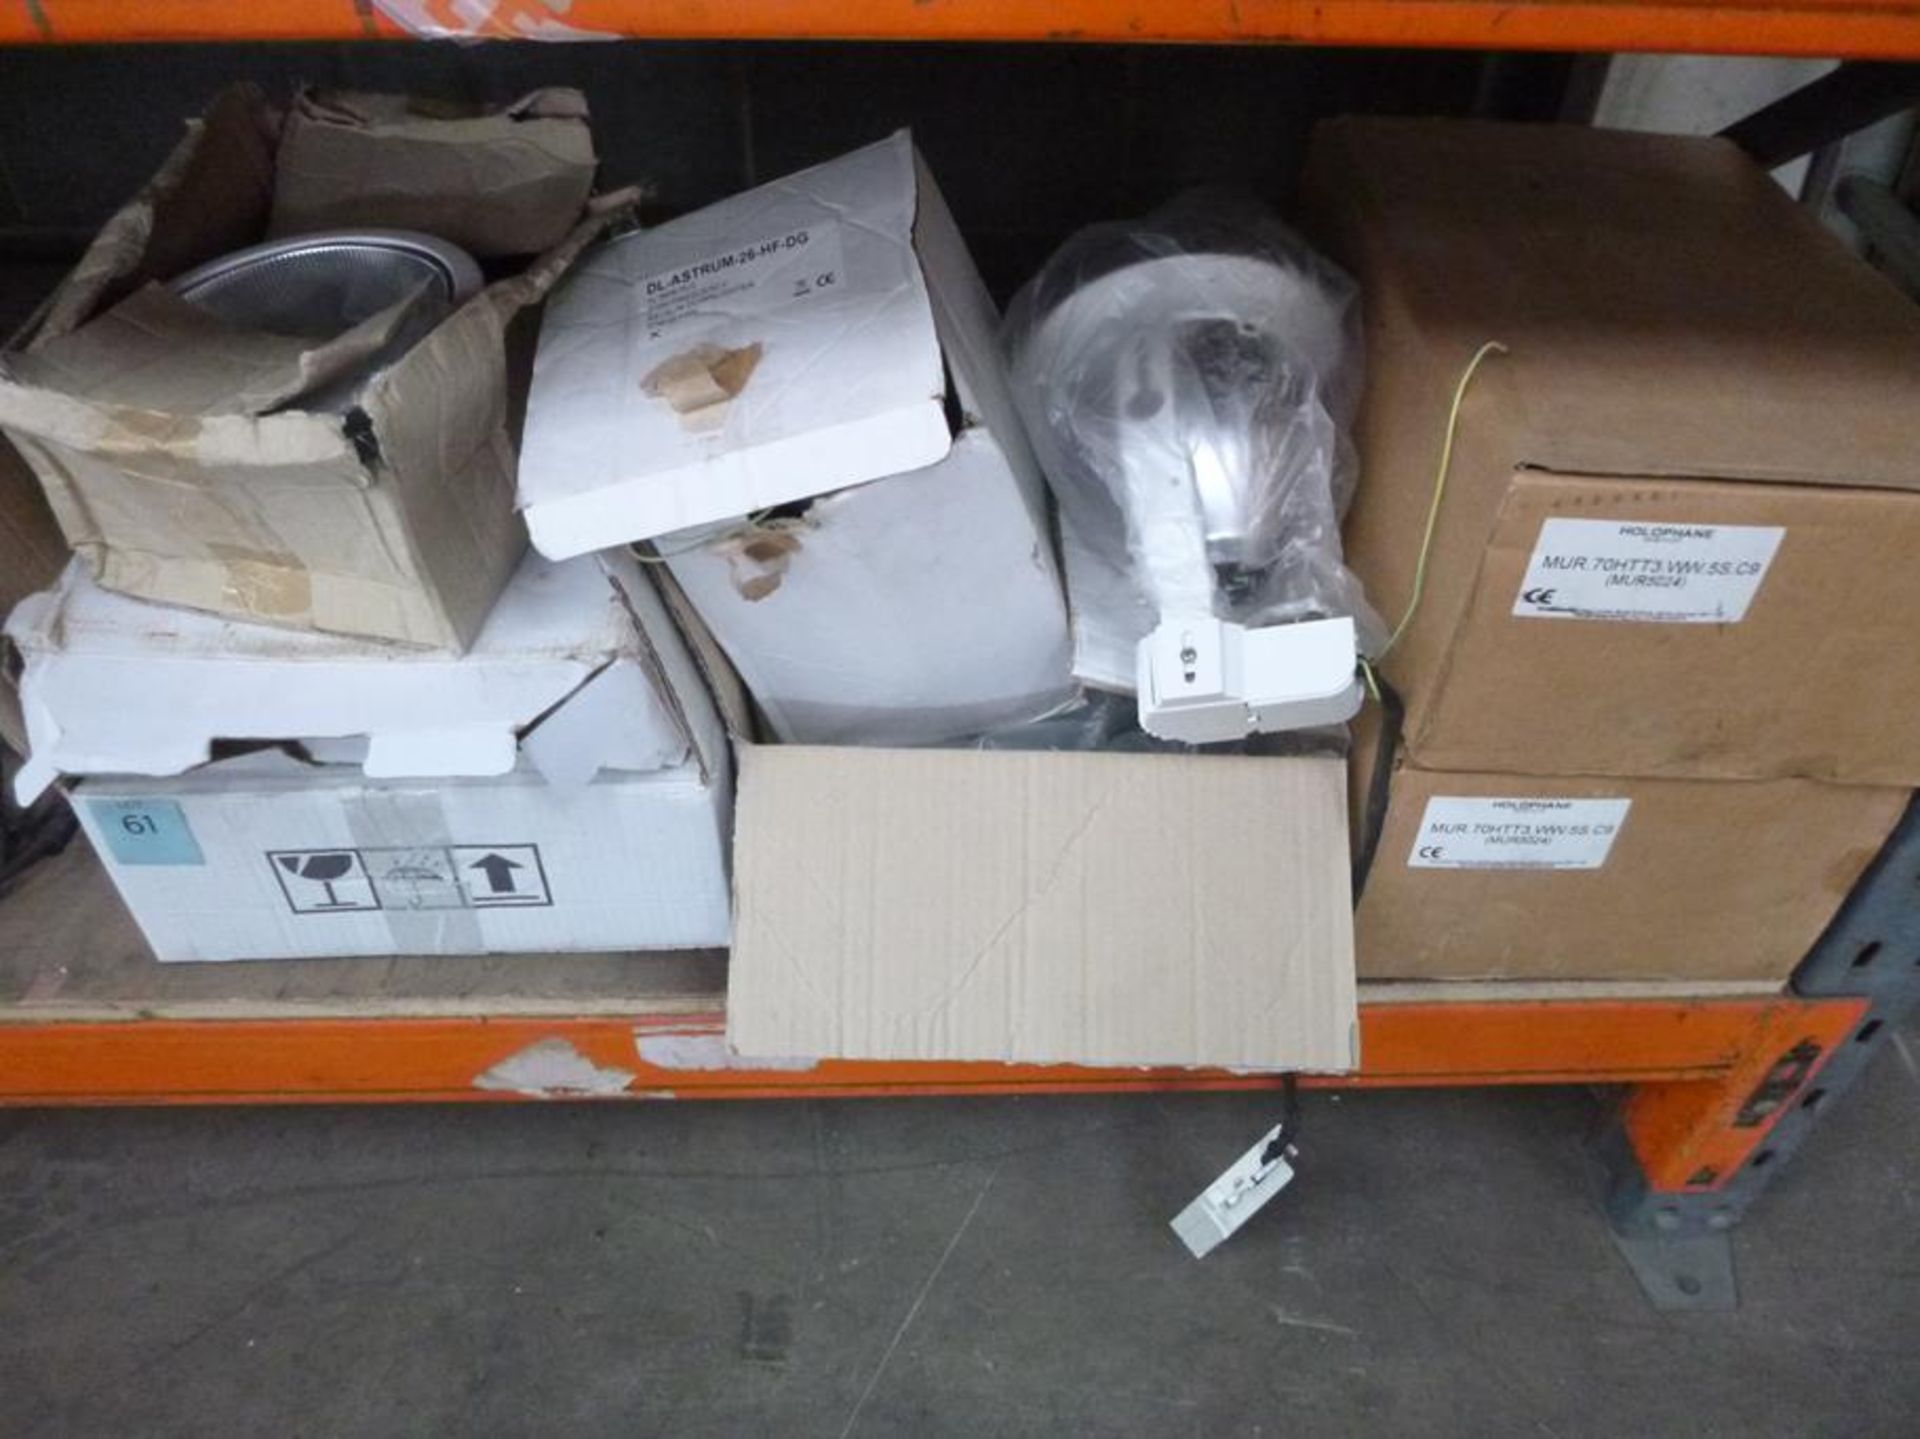 Selection of various Lighting Units etc